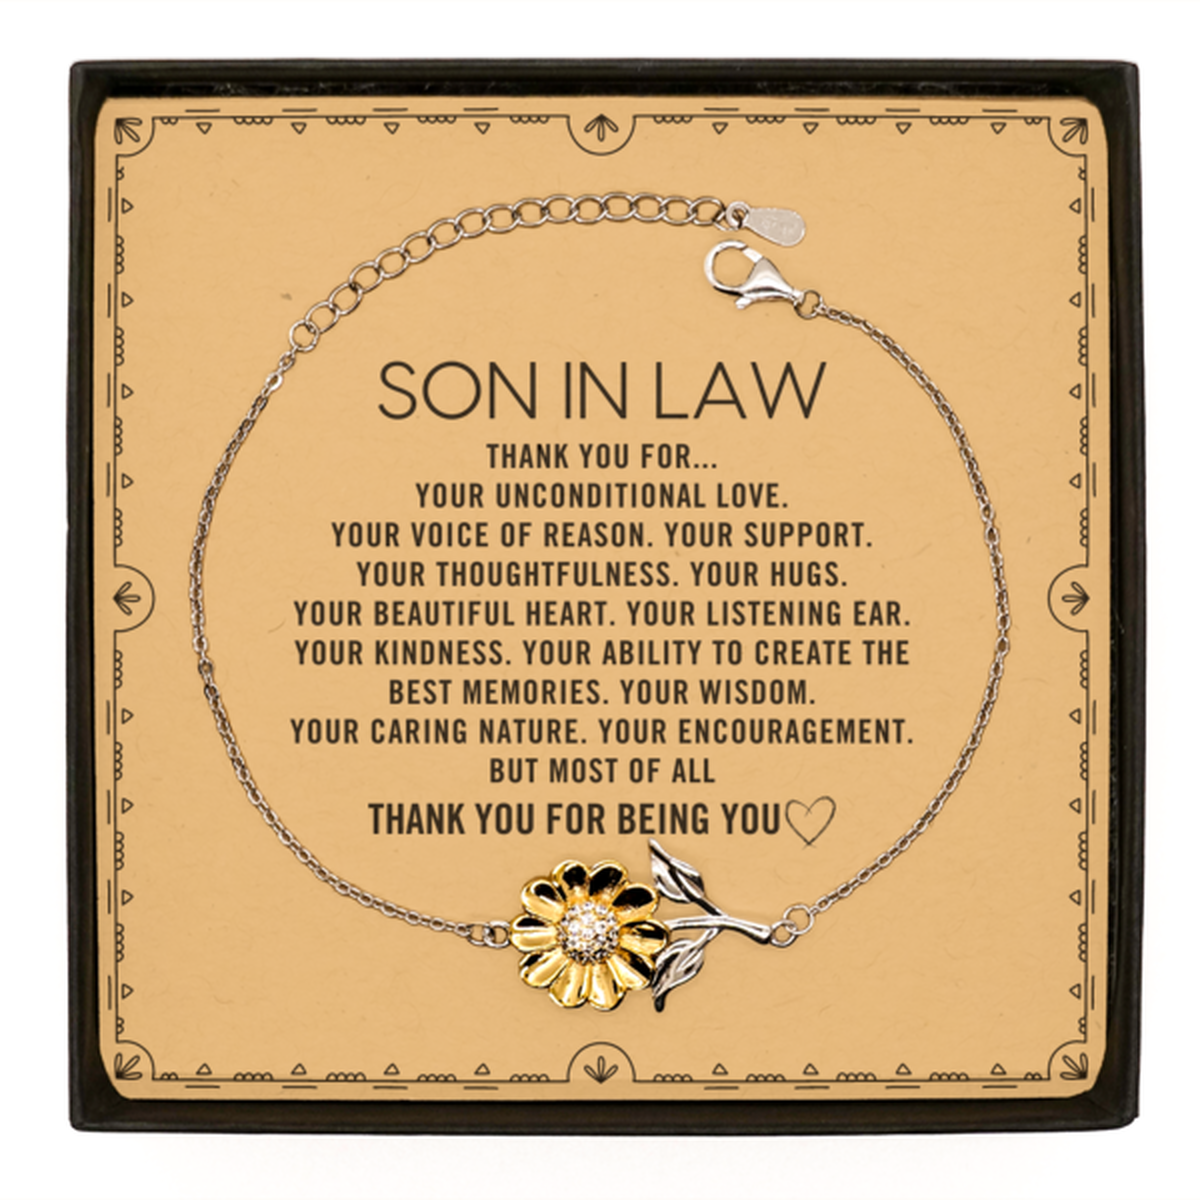 Son In Law Sunflower Bracelet Custom, Message Card Gifts For Son In Law Christmas Graduation Birthday Gifts for Men Women Son In Law Thank you for Your unconditional love